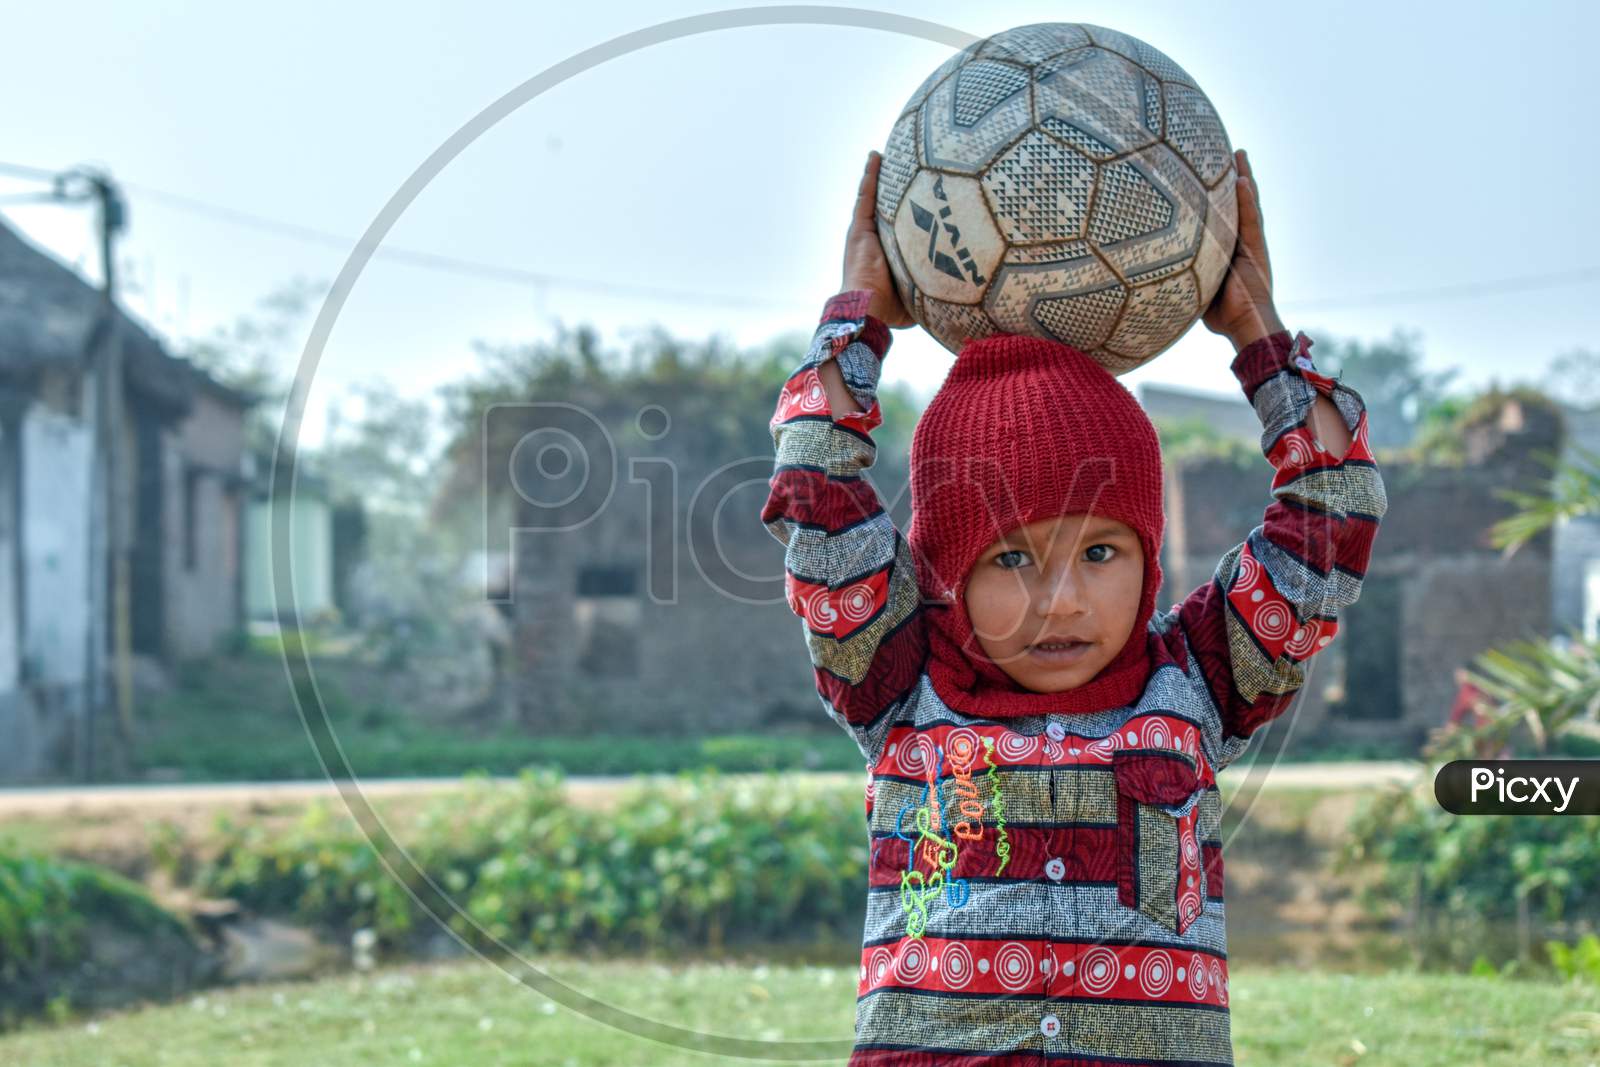 A 4-year-old poor child of a village is playing with a football